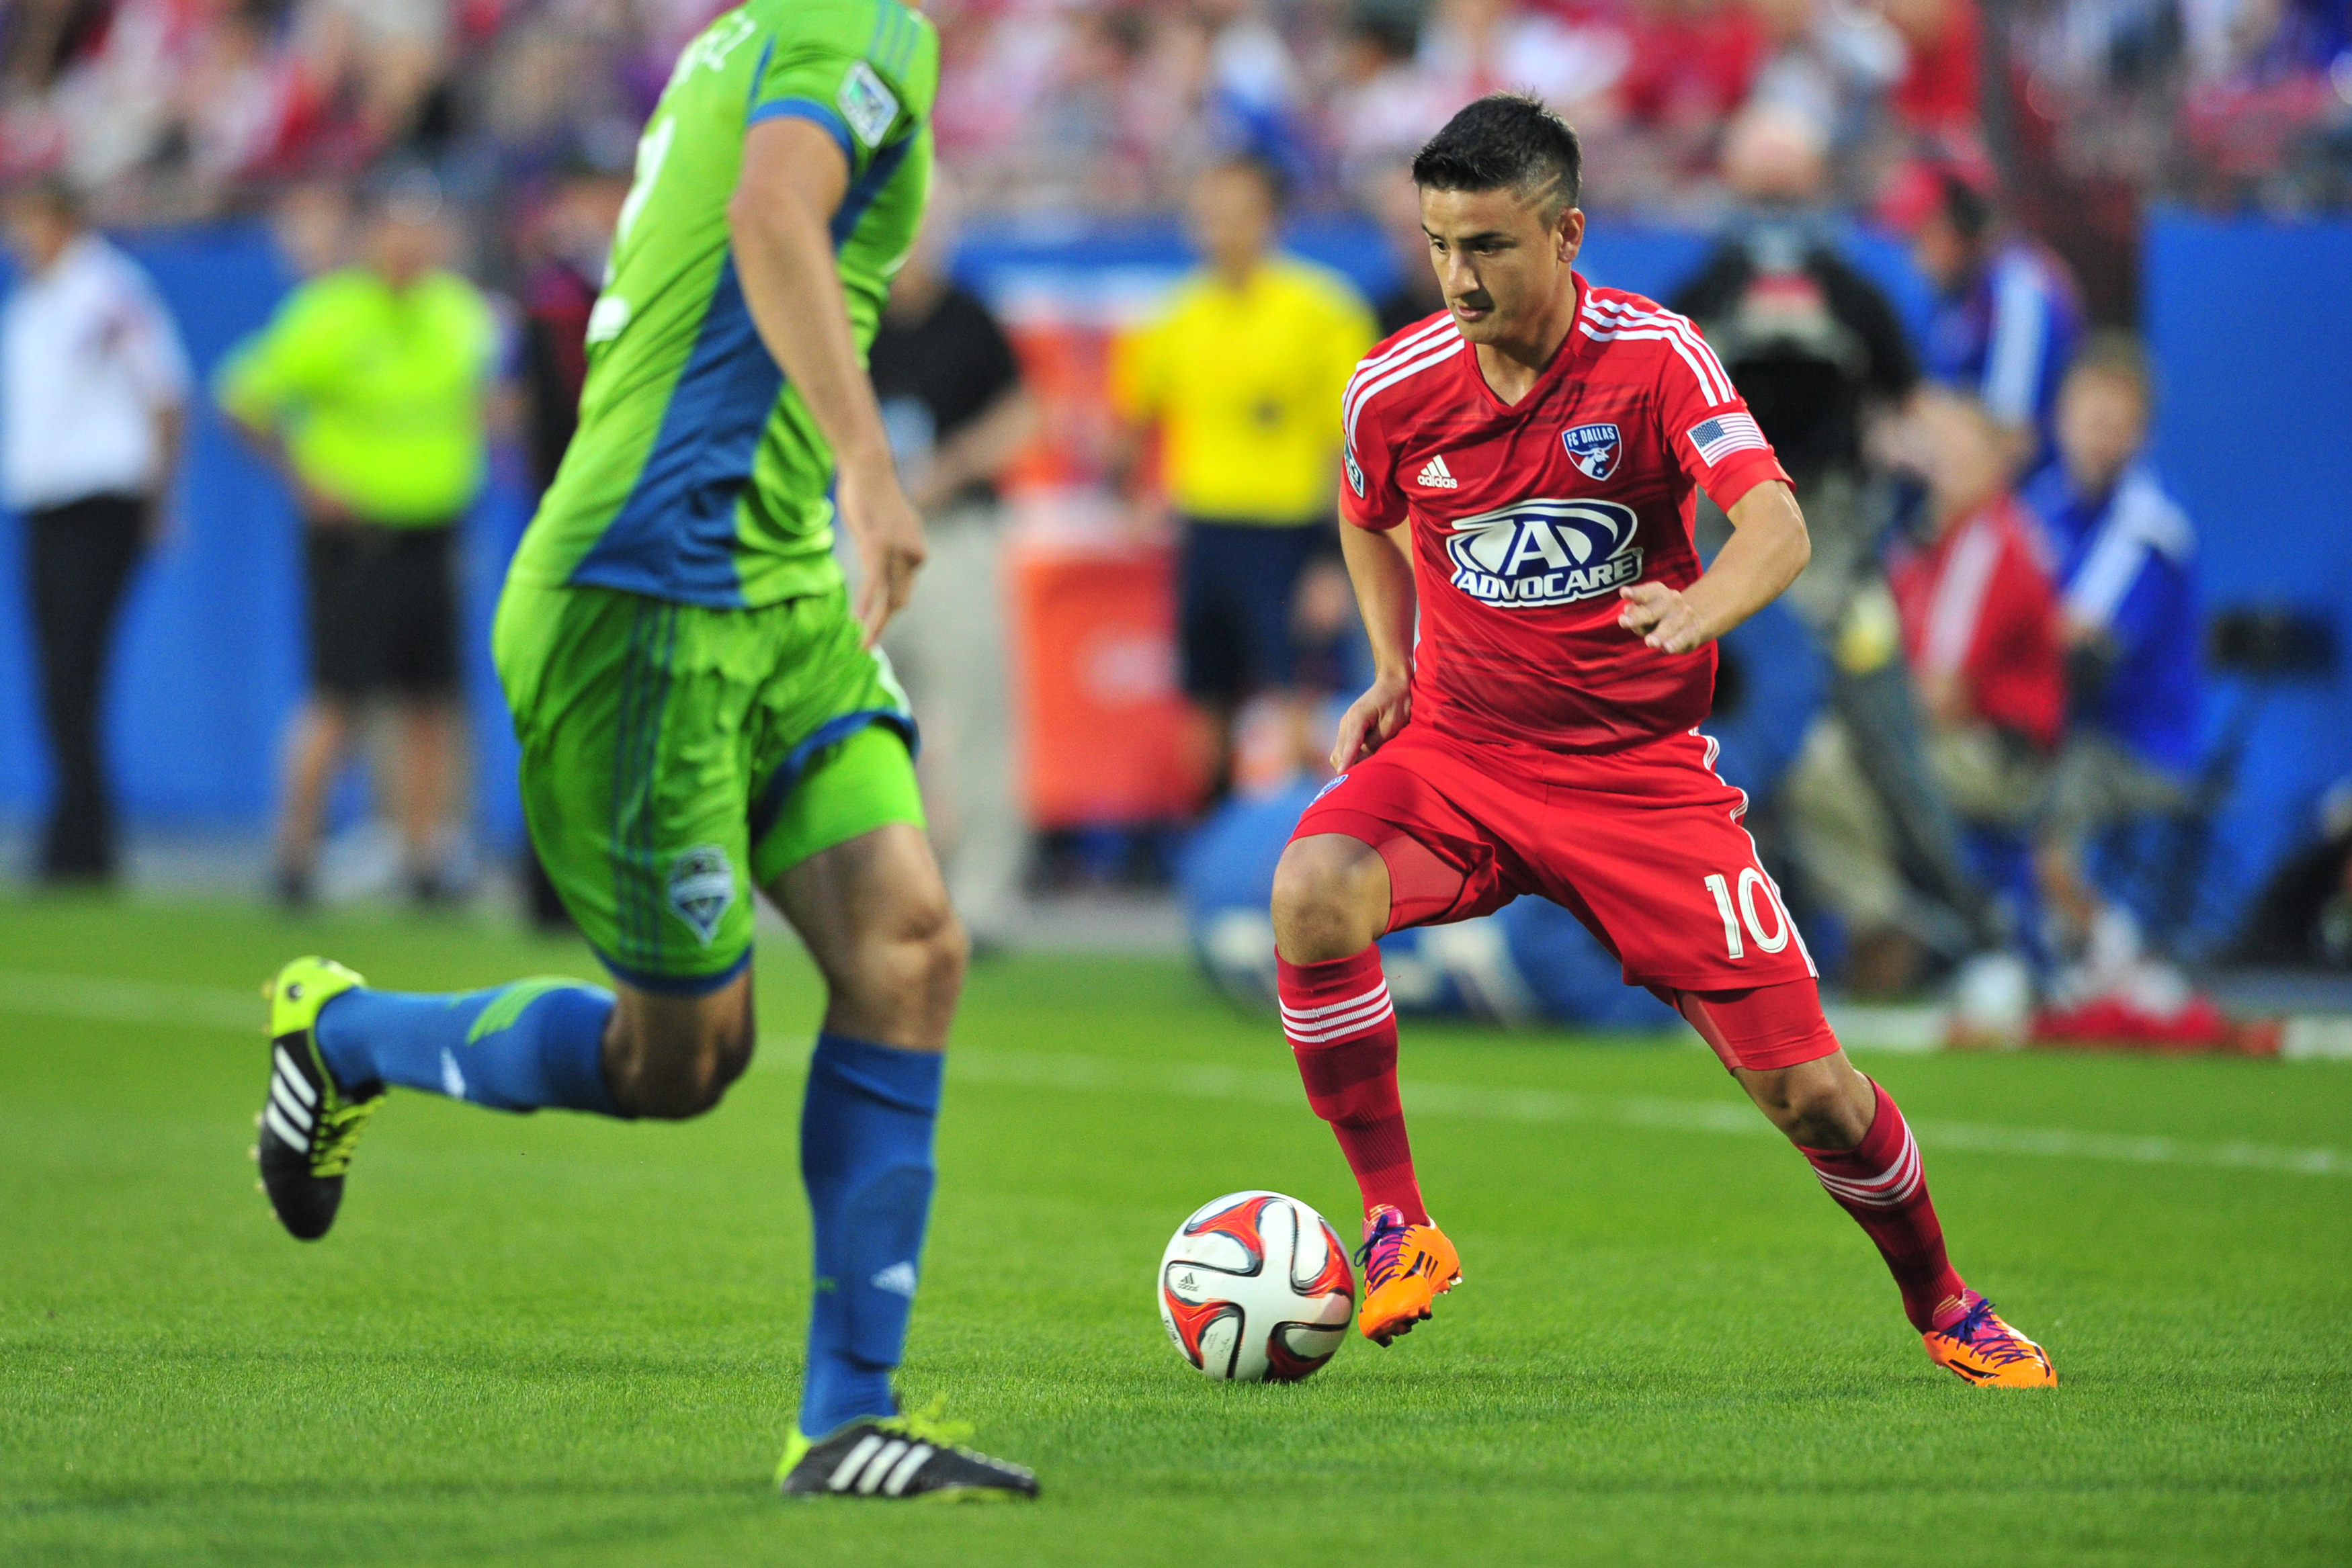 FC Dallas versatility highlighted in Mauro Diaz absence